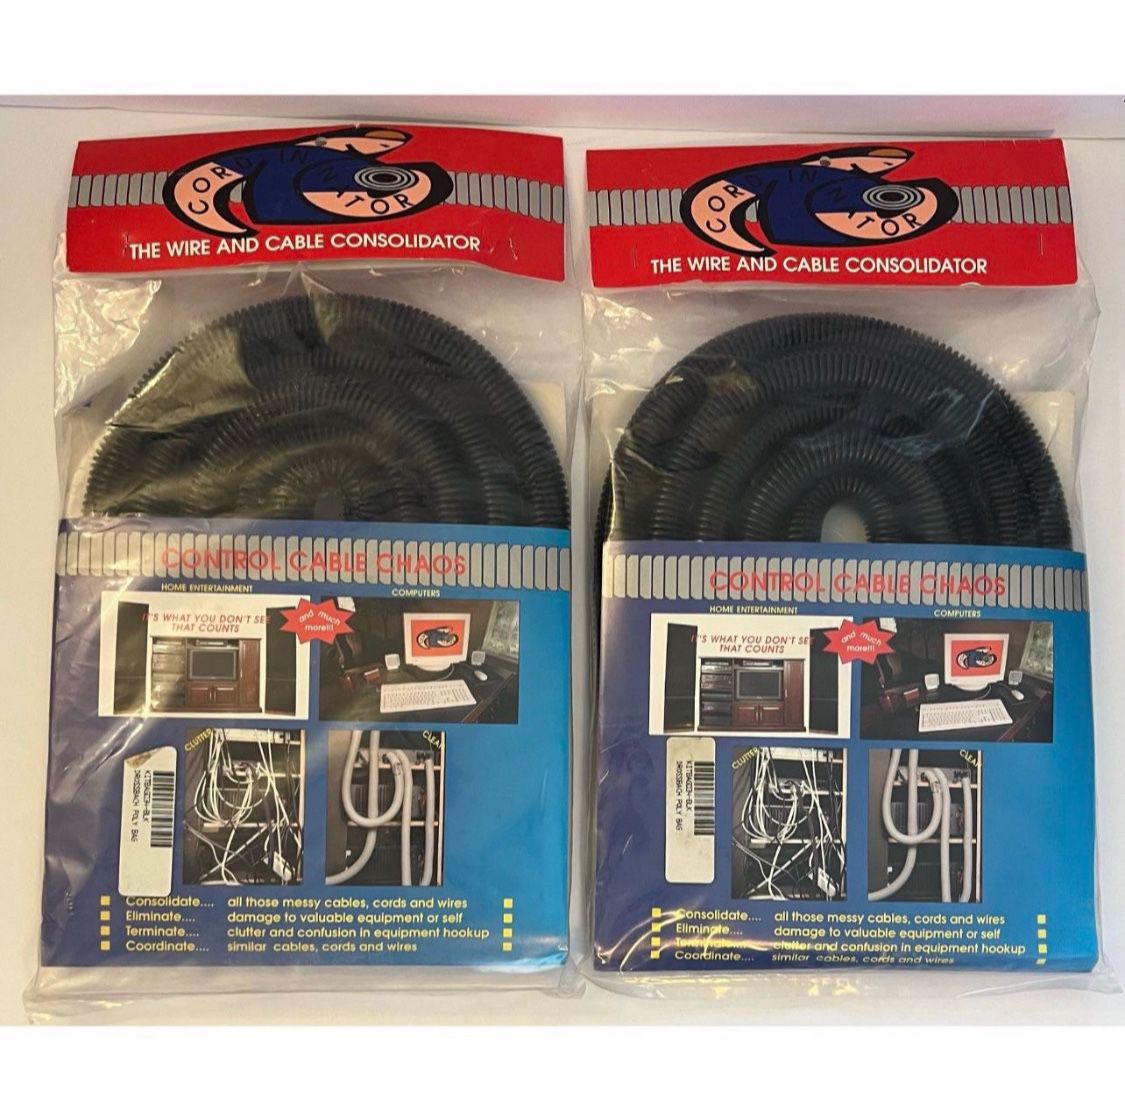 (2) NEW Cordinator Wire & Cable Consolidator Control Cable Lot of 2 Chaos Makes 8 Ft Or 10 Ft Tube